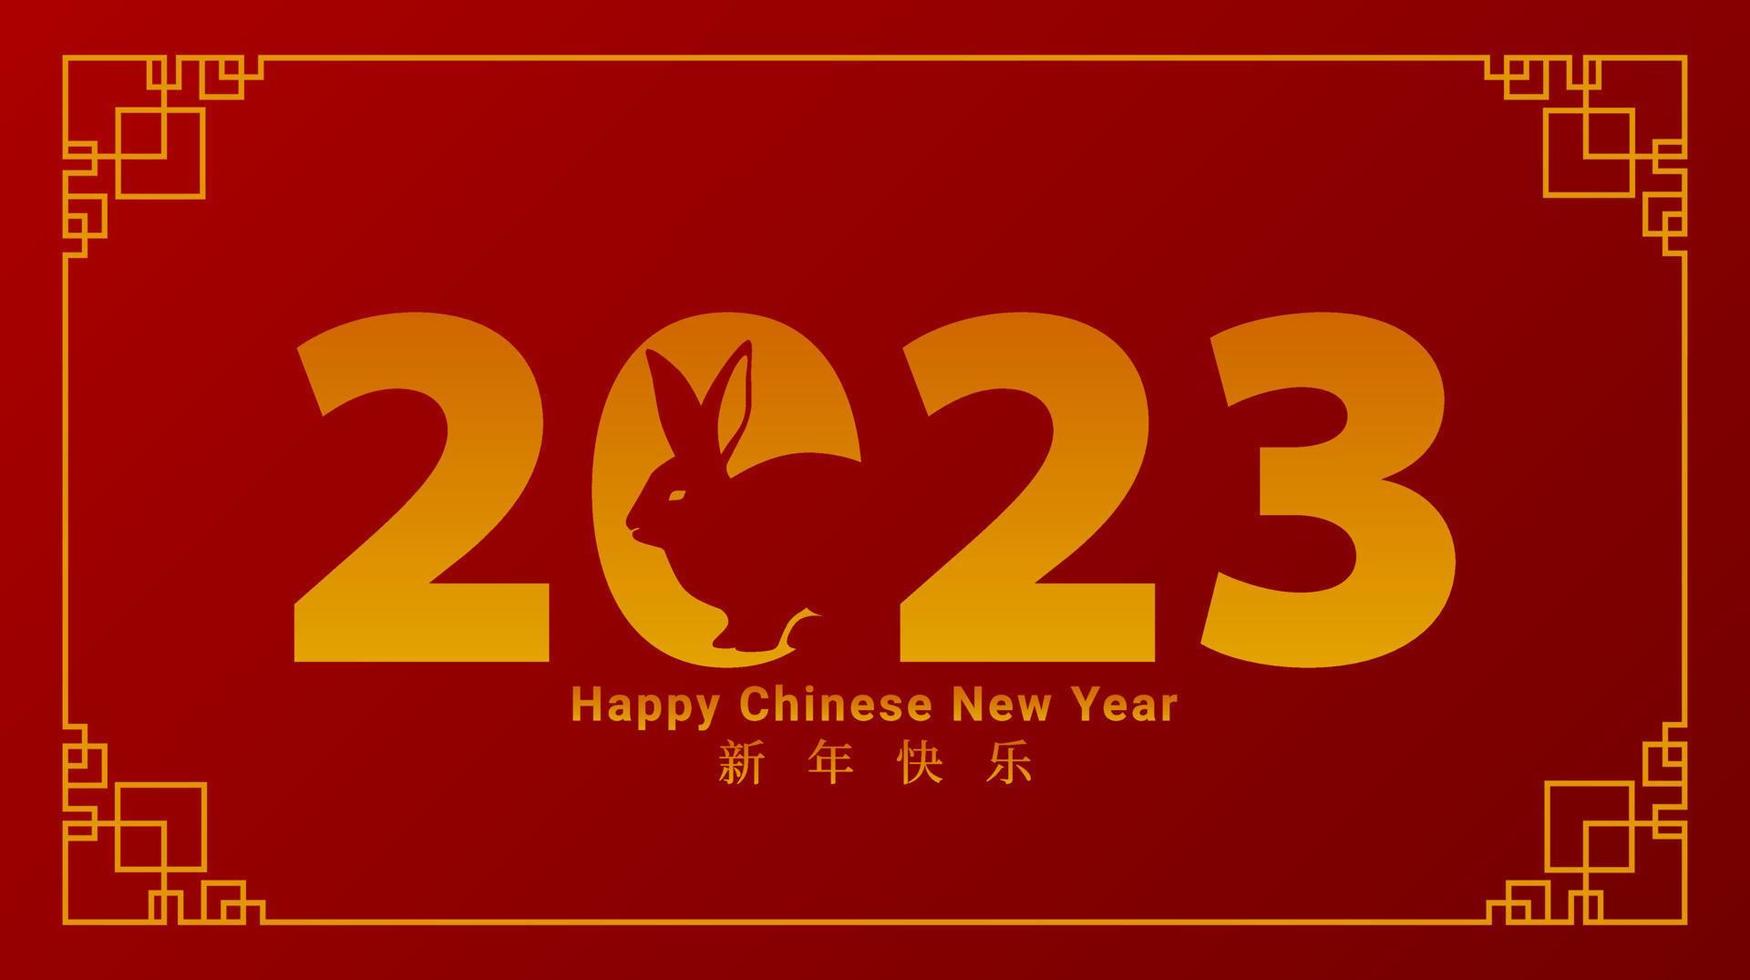 Chinese new year 2023. Minimalist lunar new year art design for card, cover, poster, web banner. Year of the rabbit. Vector illustration